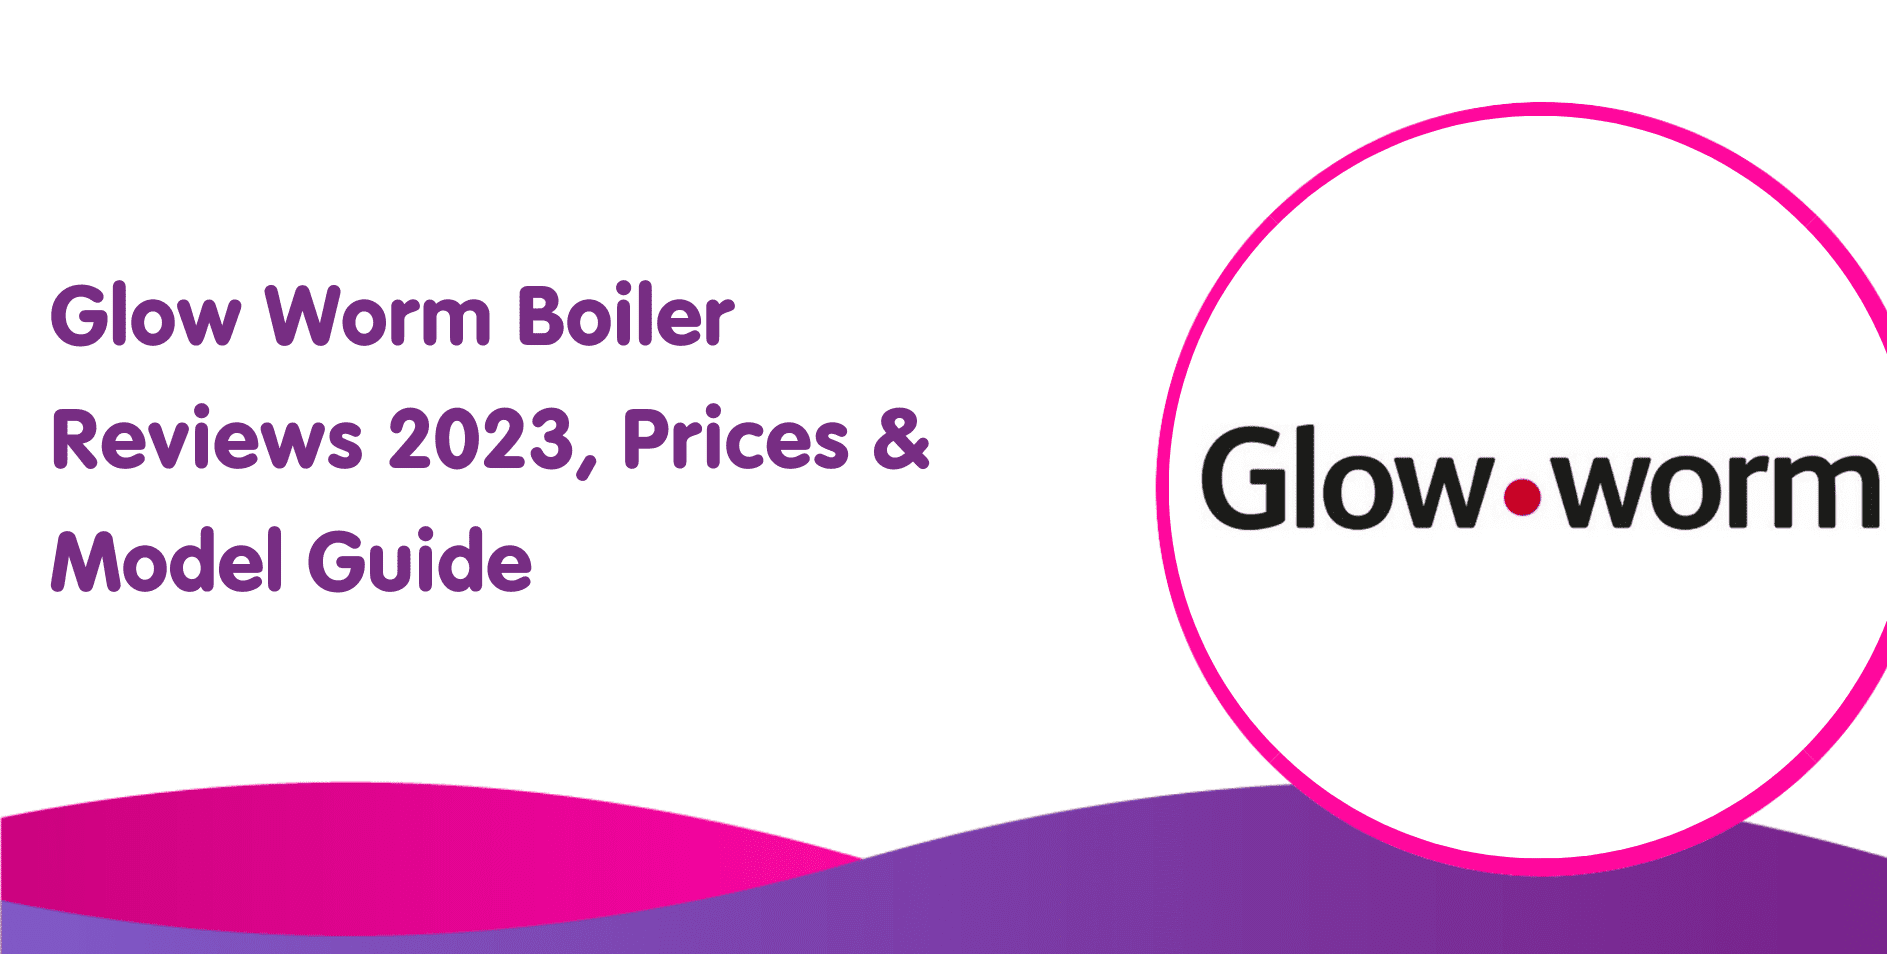 Glow Worm Boiler Reviews 2023, Prices & Model Guide